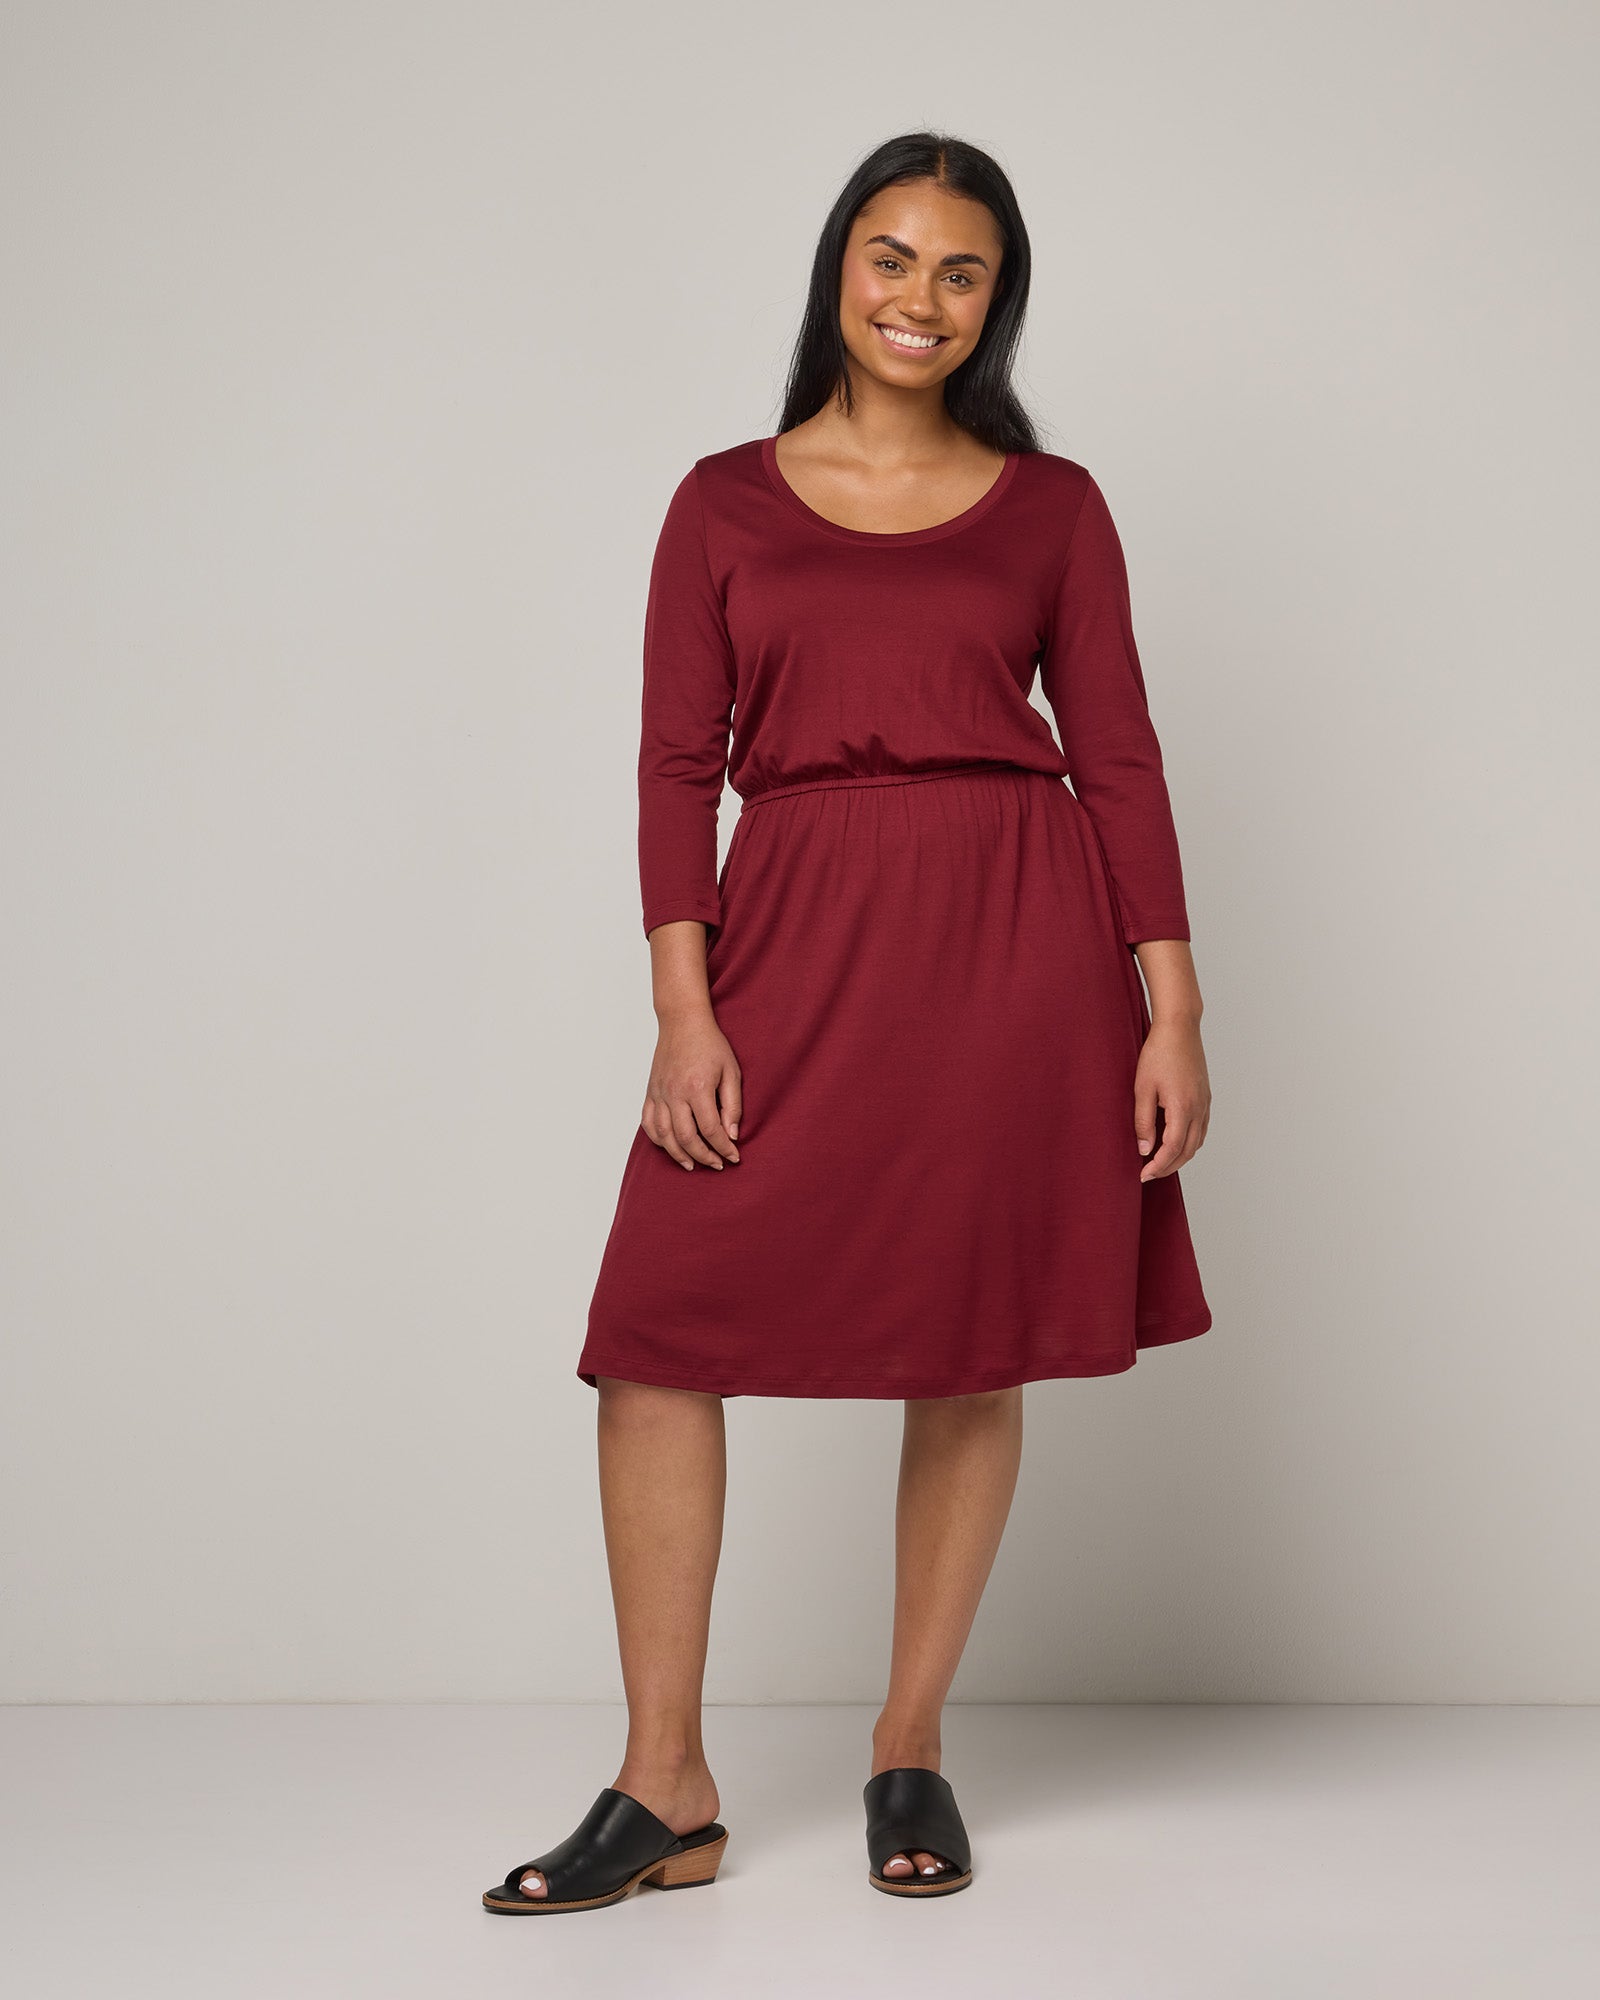 Fit & Flare Dresses - wool